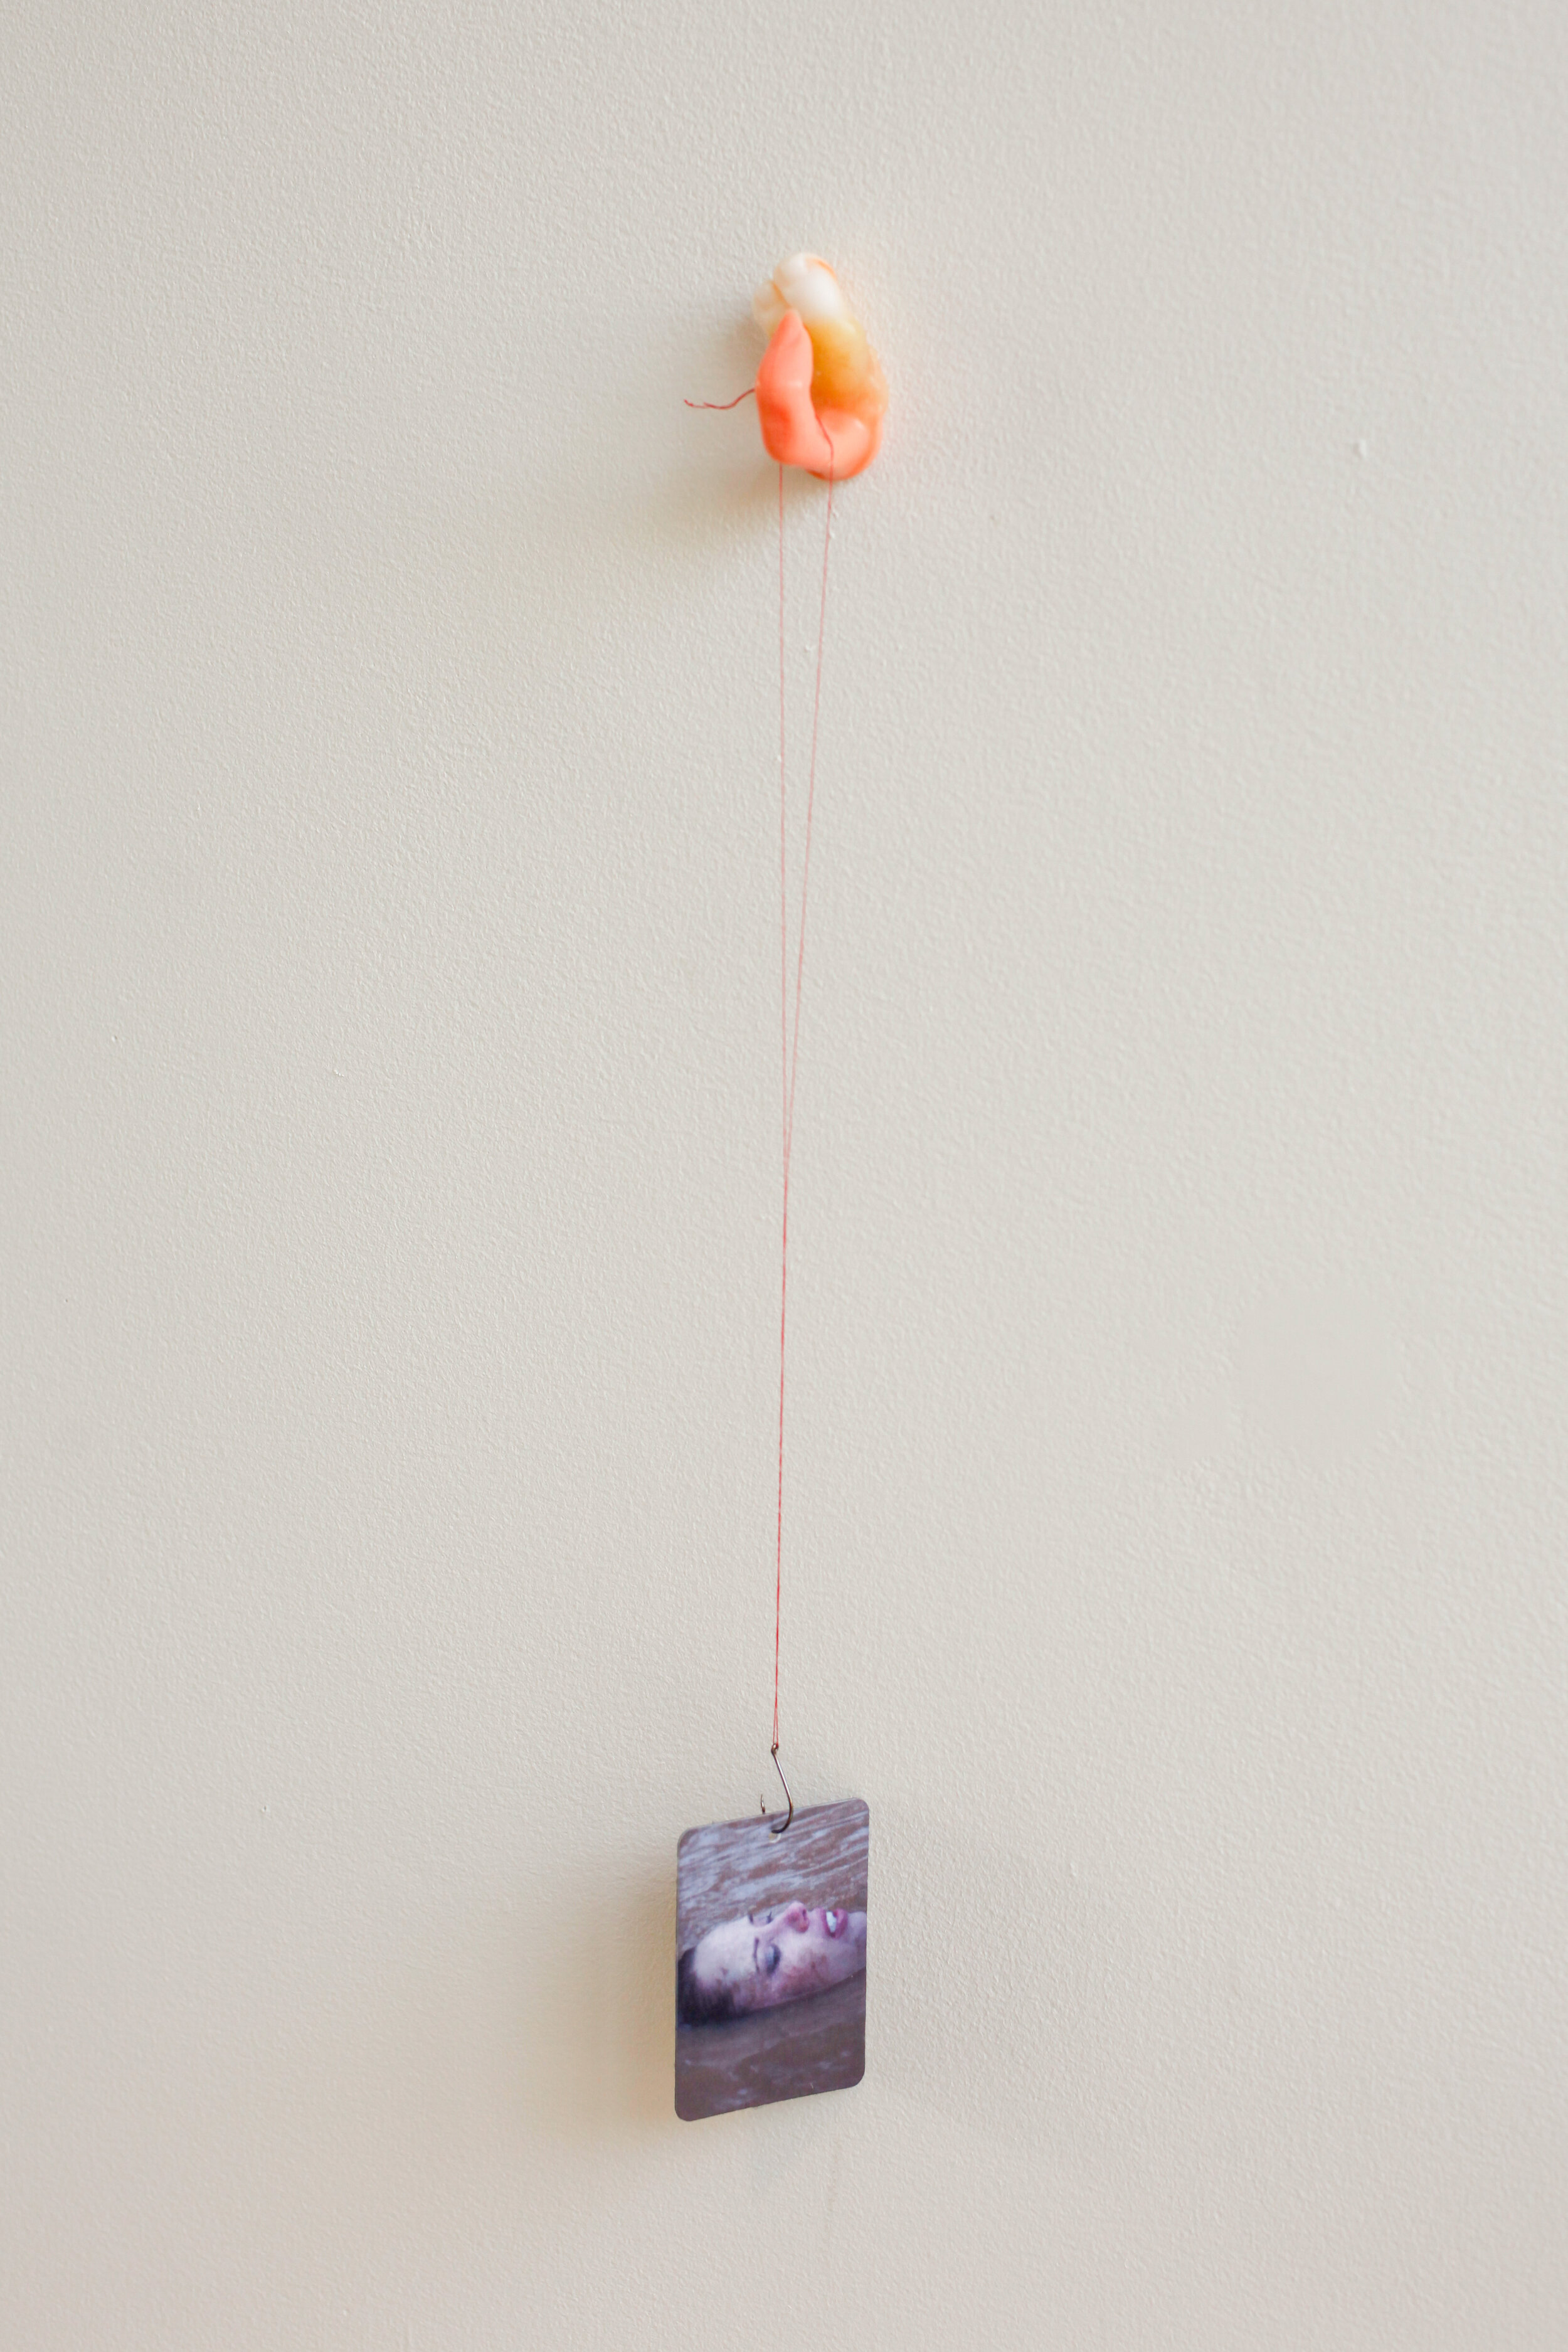  Lauren Lee  Untitled , 2019  Thirteen Customized car fresheners, plastic manicure practice finger, thread,  fish hook, paraffin wax, blend of essential Oils: "Puppy Paws," "Basement" and "Dusty Carpet" 18 x 3.3 ’x 3 inches (46 x 8 x 8 cm) approximat